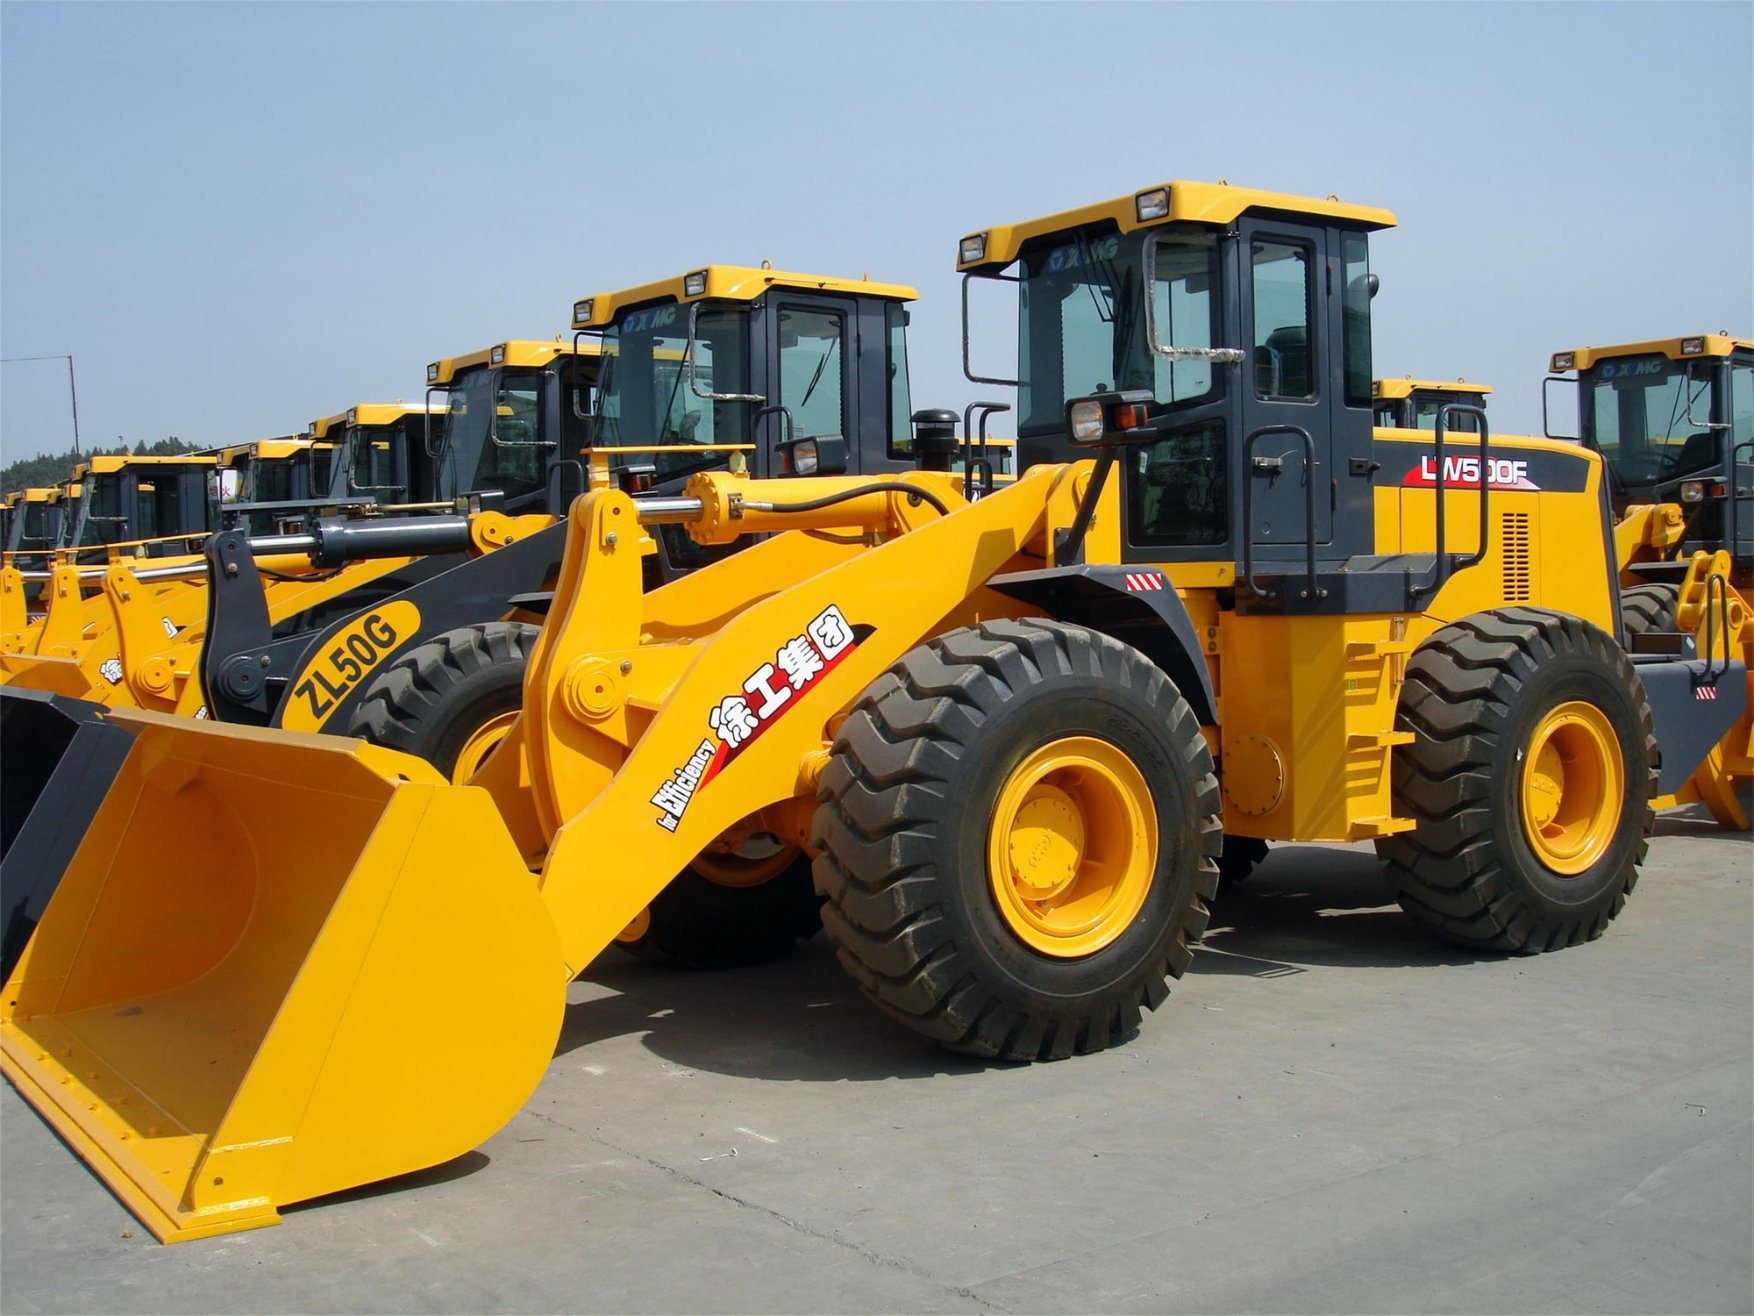 Chinese Wheel Loader Lw500fn with Toad′s Mouth Clamp for Sale